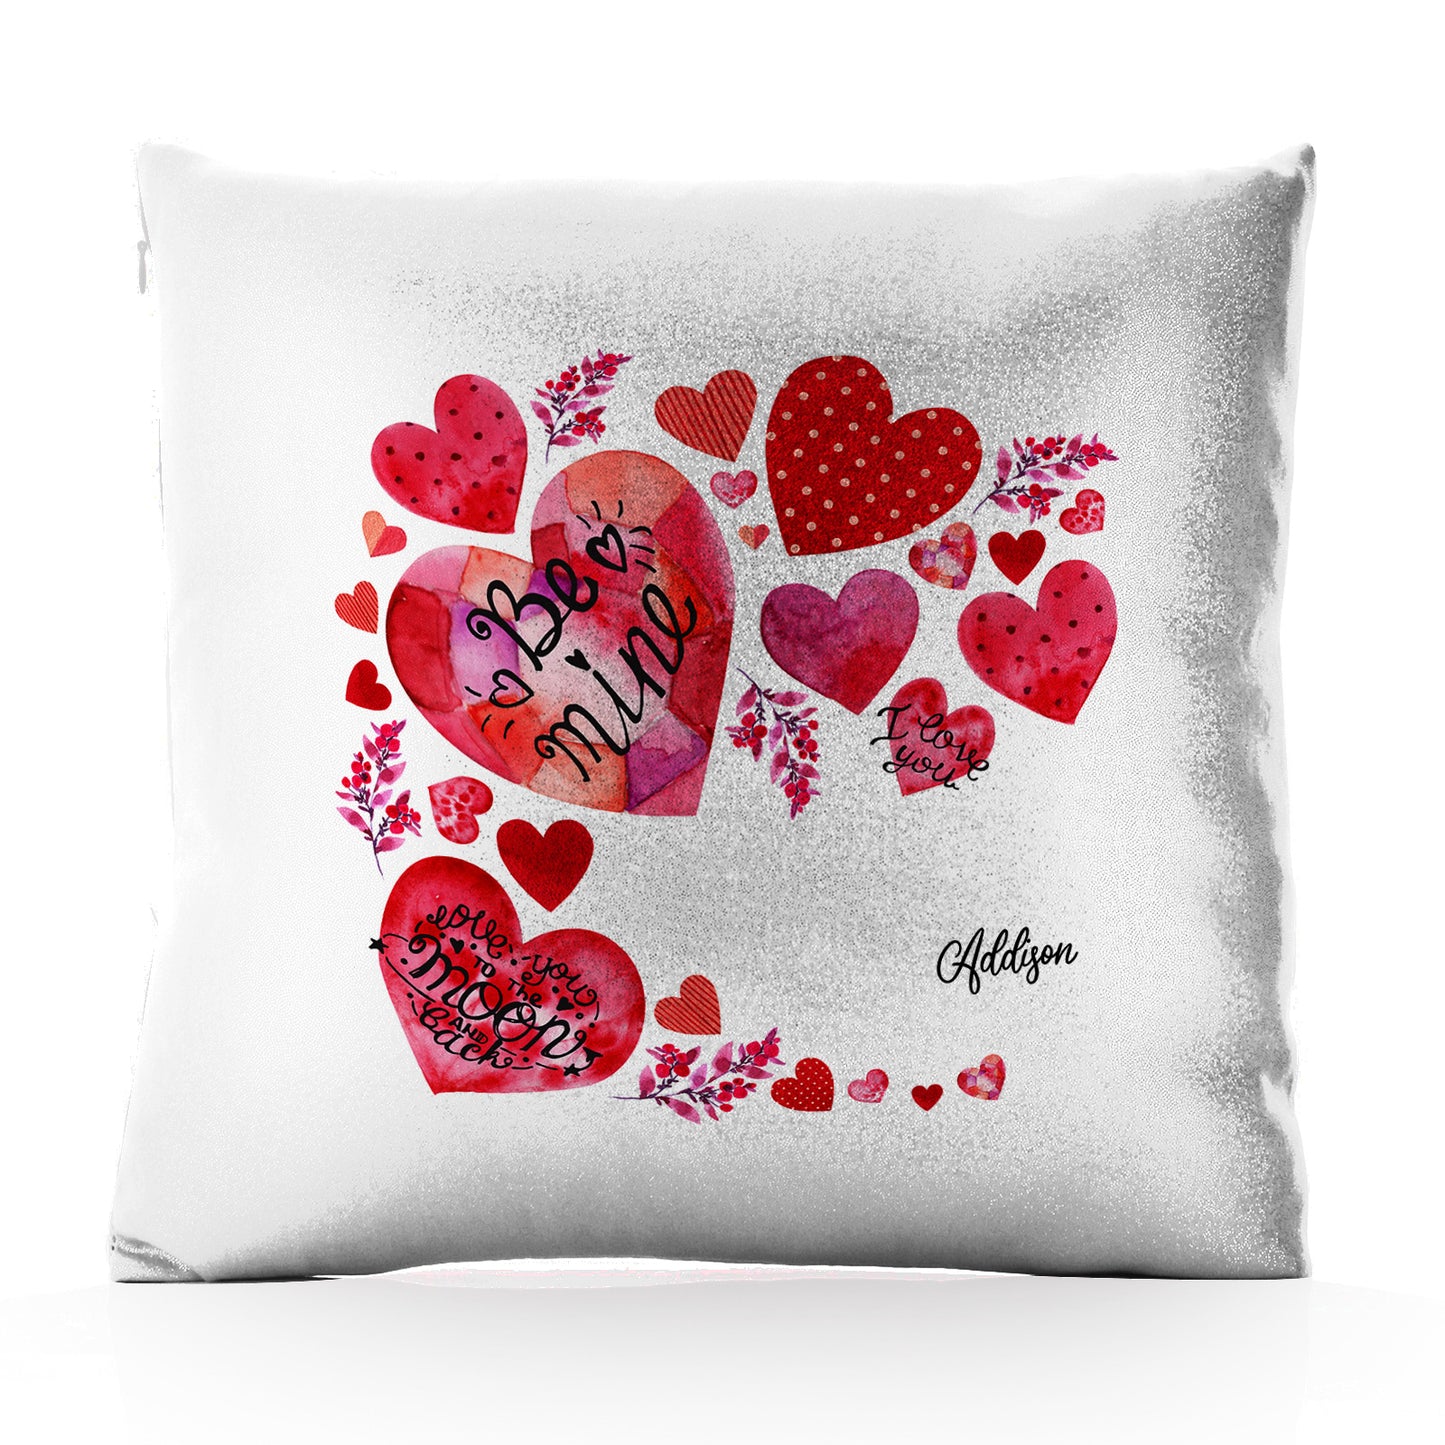 Personalised Glitter Cushion with Stylish Text and Material Hearts Love Message Print